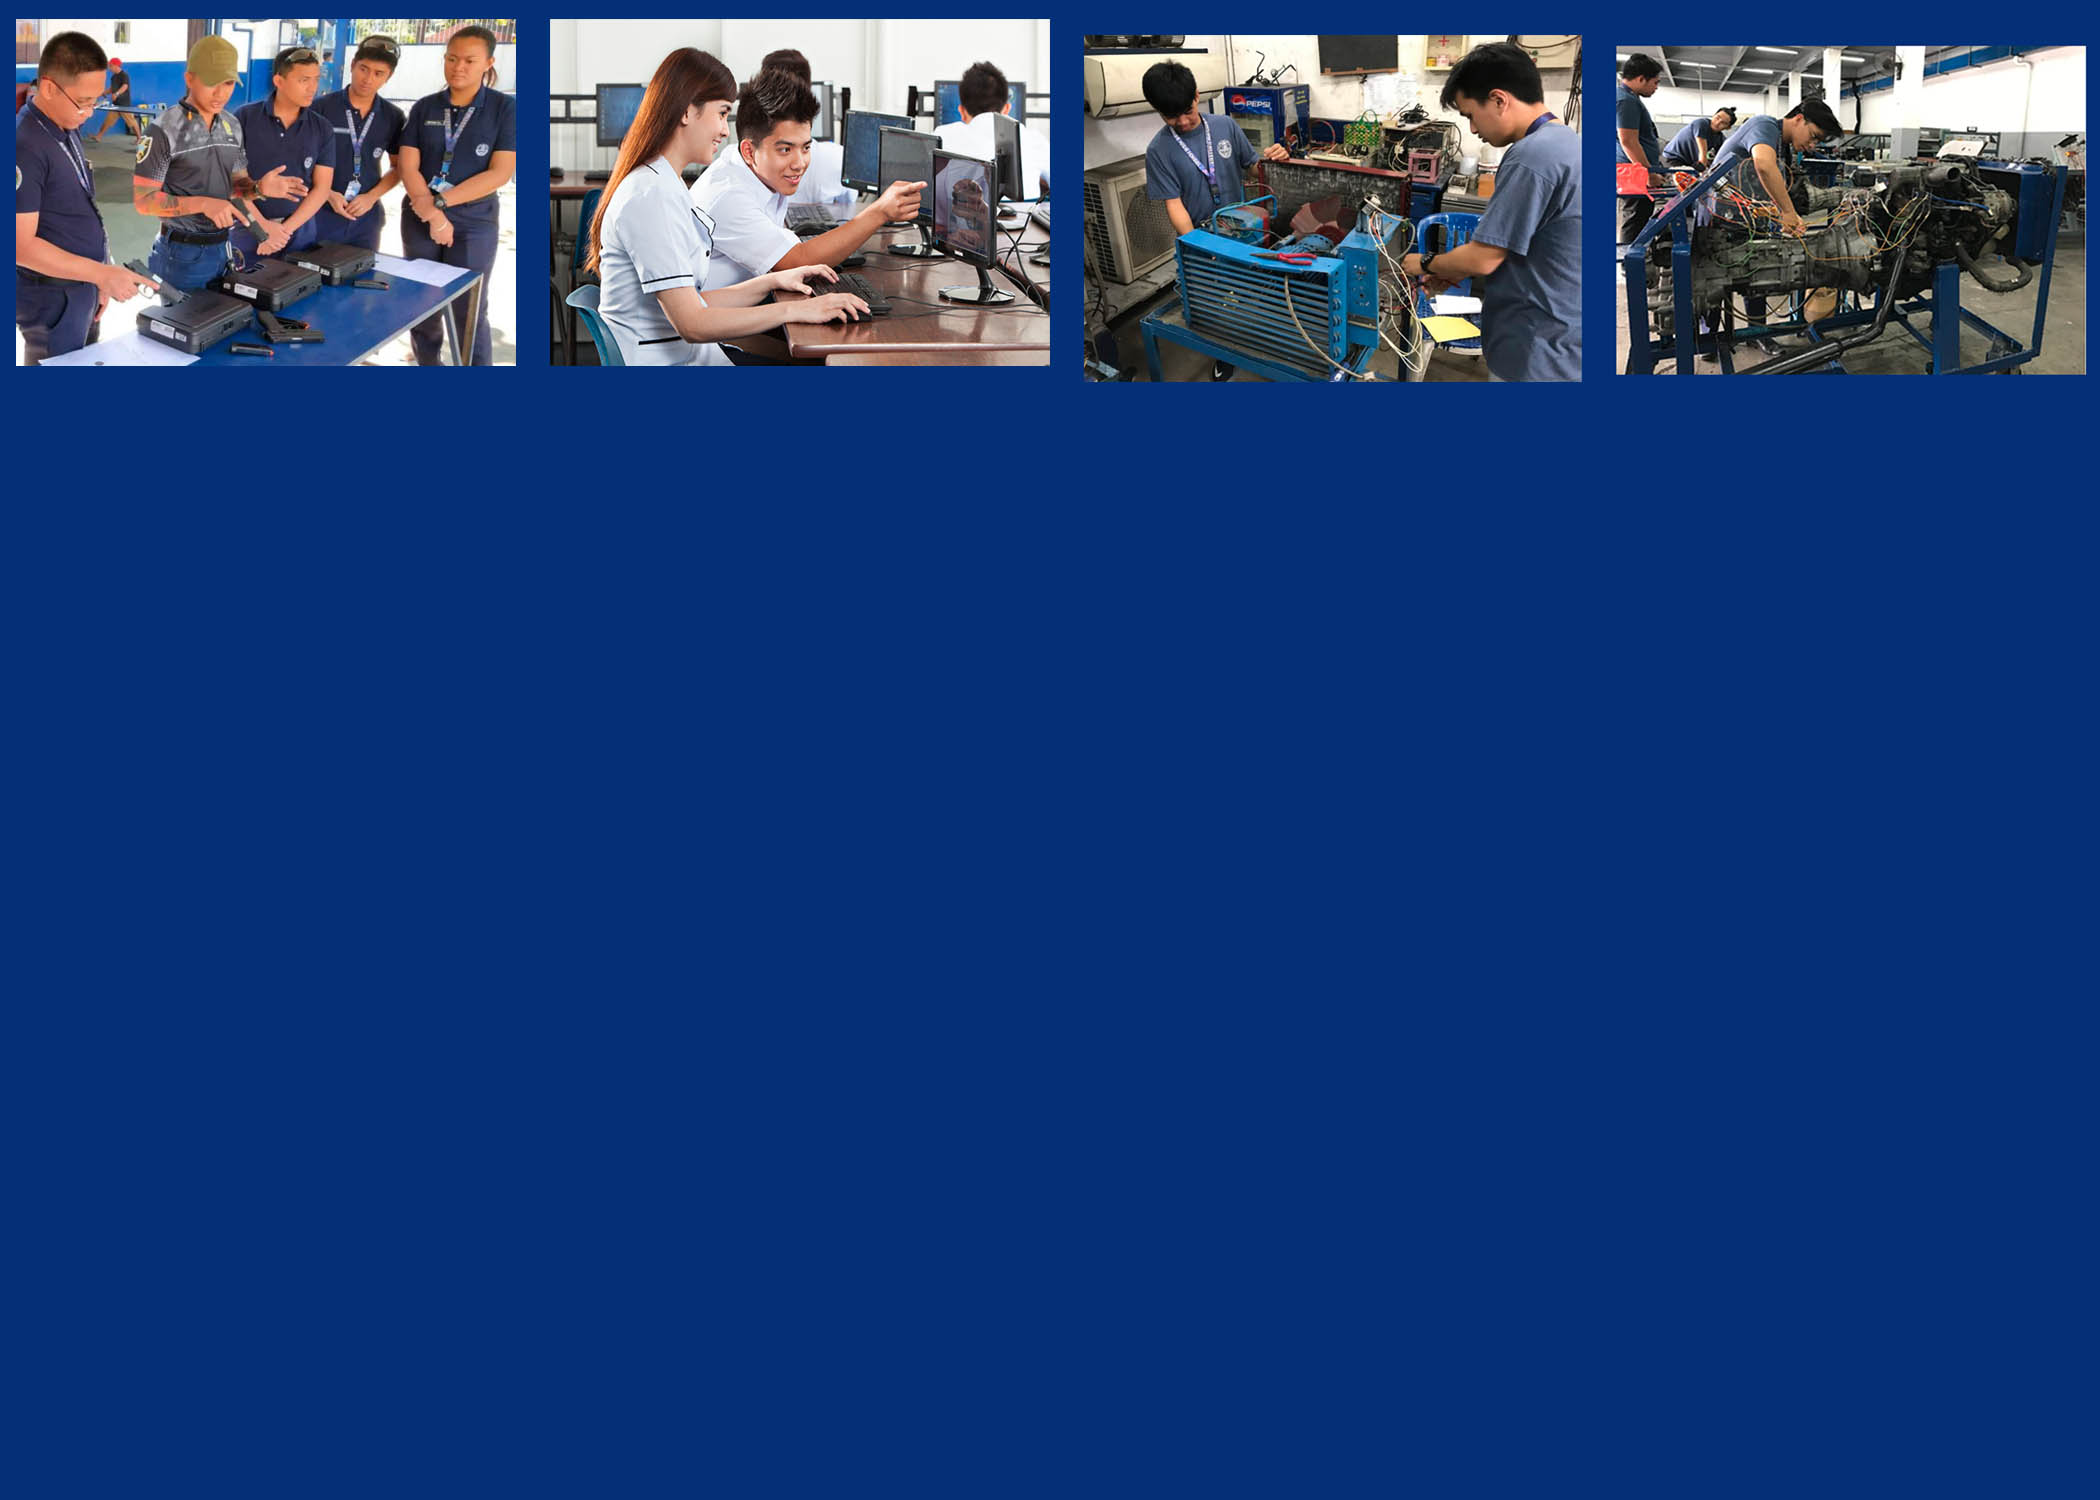 Automotive Servicing NC1 and NC2, Refrigeration & Air Conditioning Registration for the 2nd Semester SY 2023-2024 Now Open!  Classes start December 4, 2023.